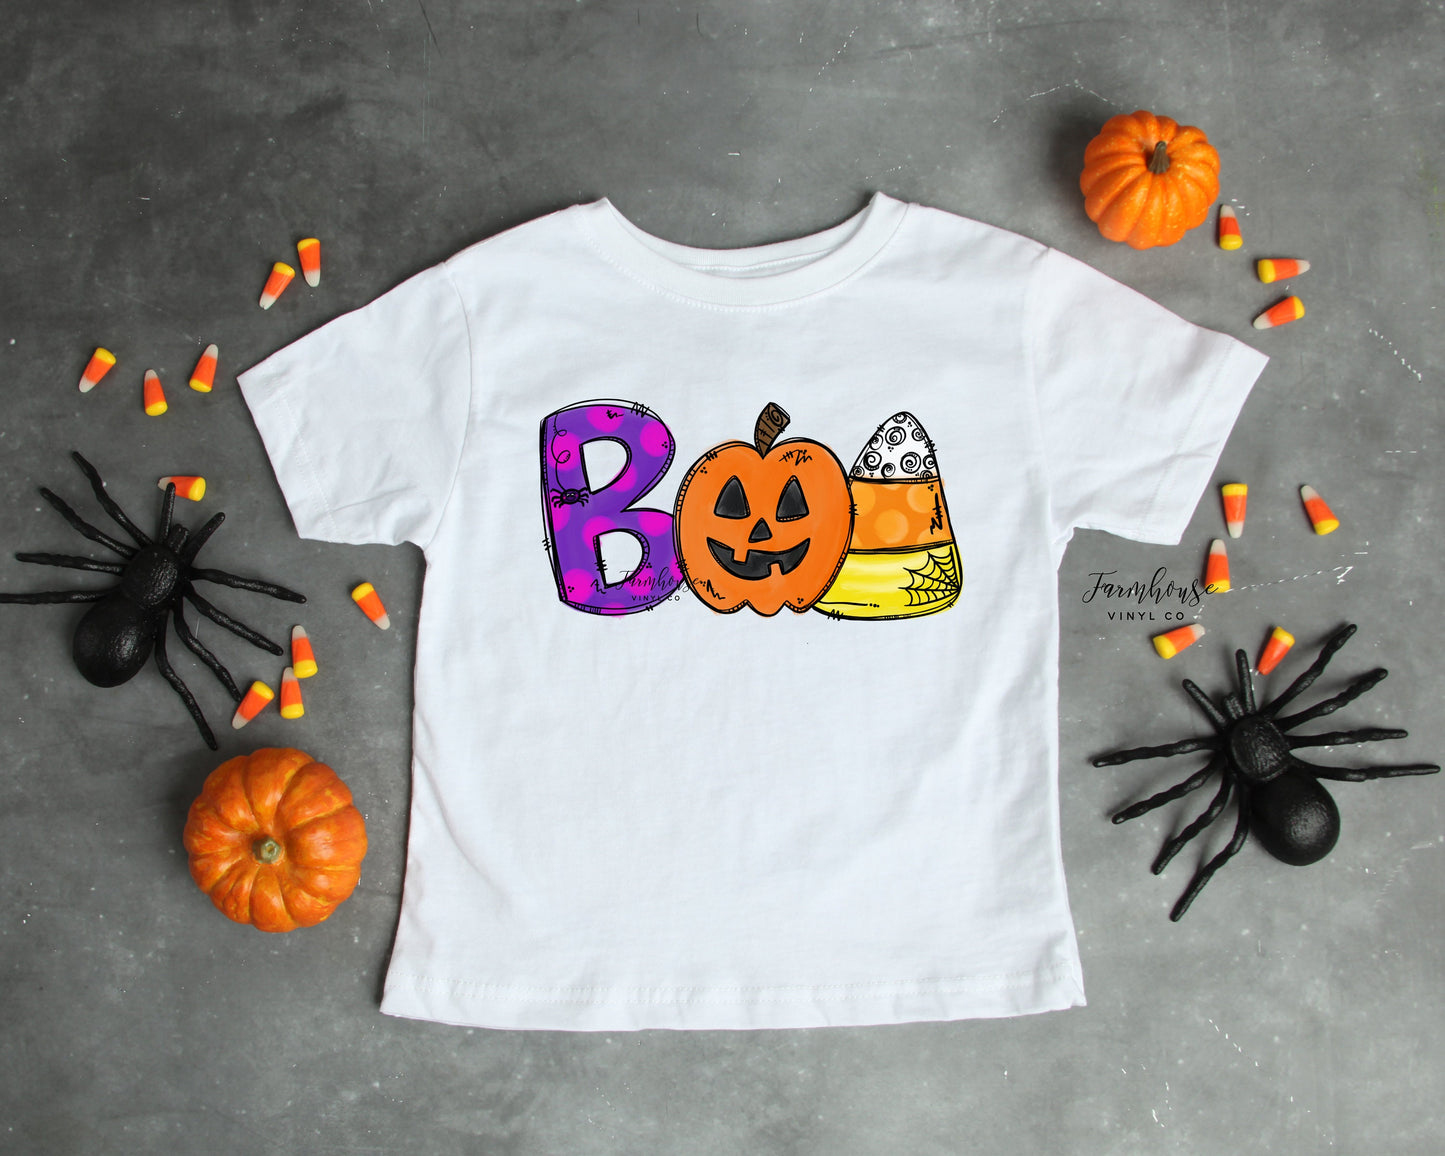 Halloween Is My Favorite Family Matching Shirts / Little Thing Halloween T Shirt / Group Shirts Teachers Family Friends / Halloween Party - Farmhouse Vinyl Co